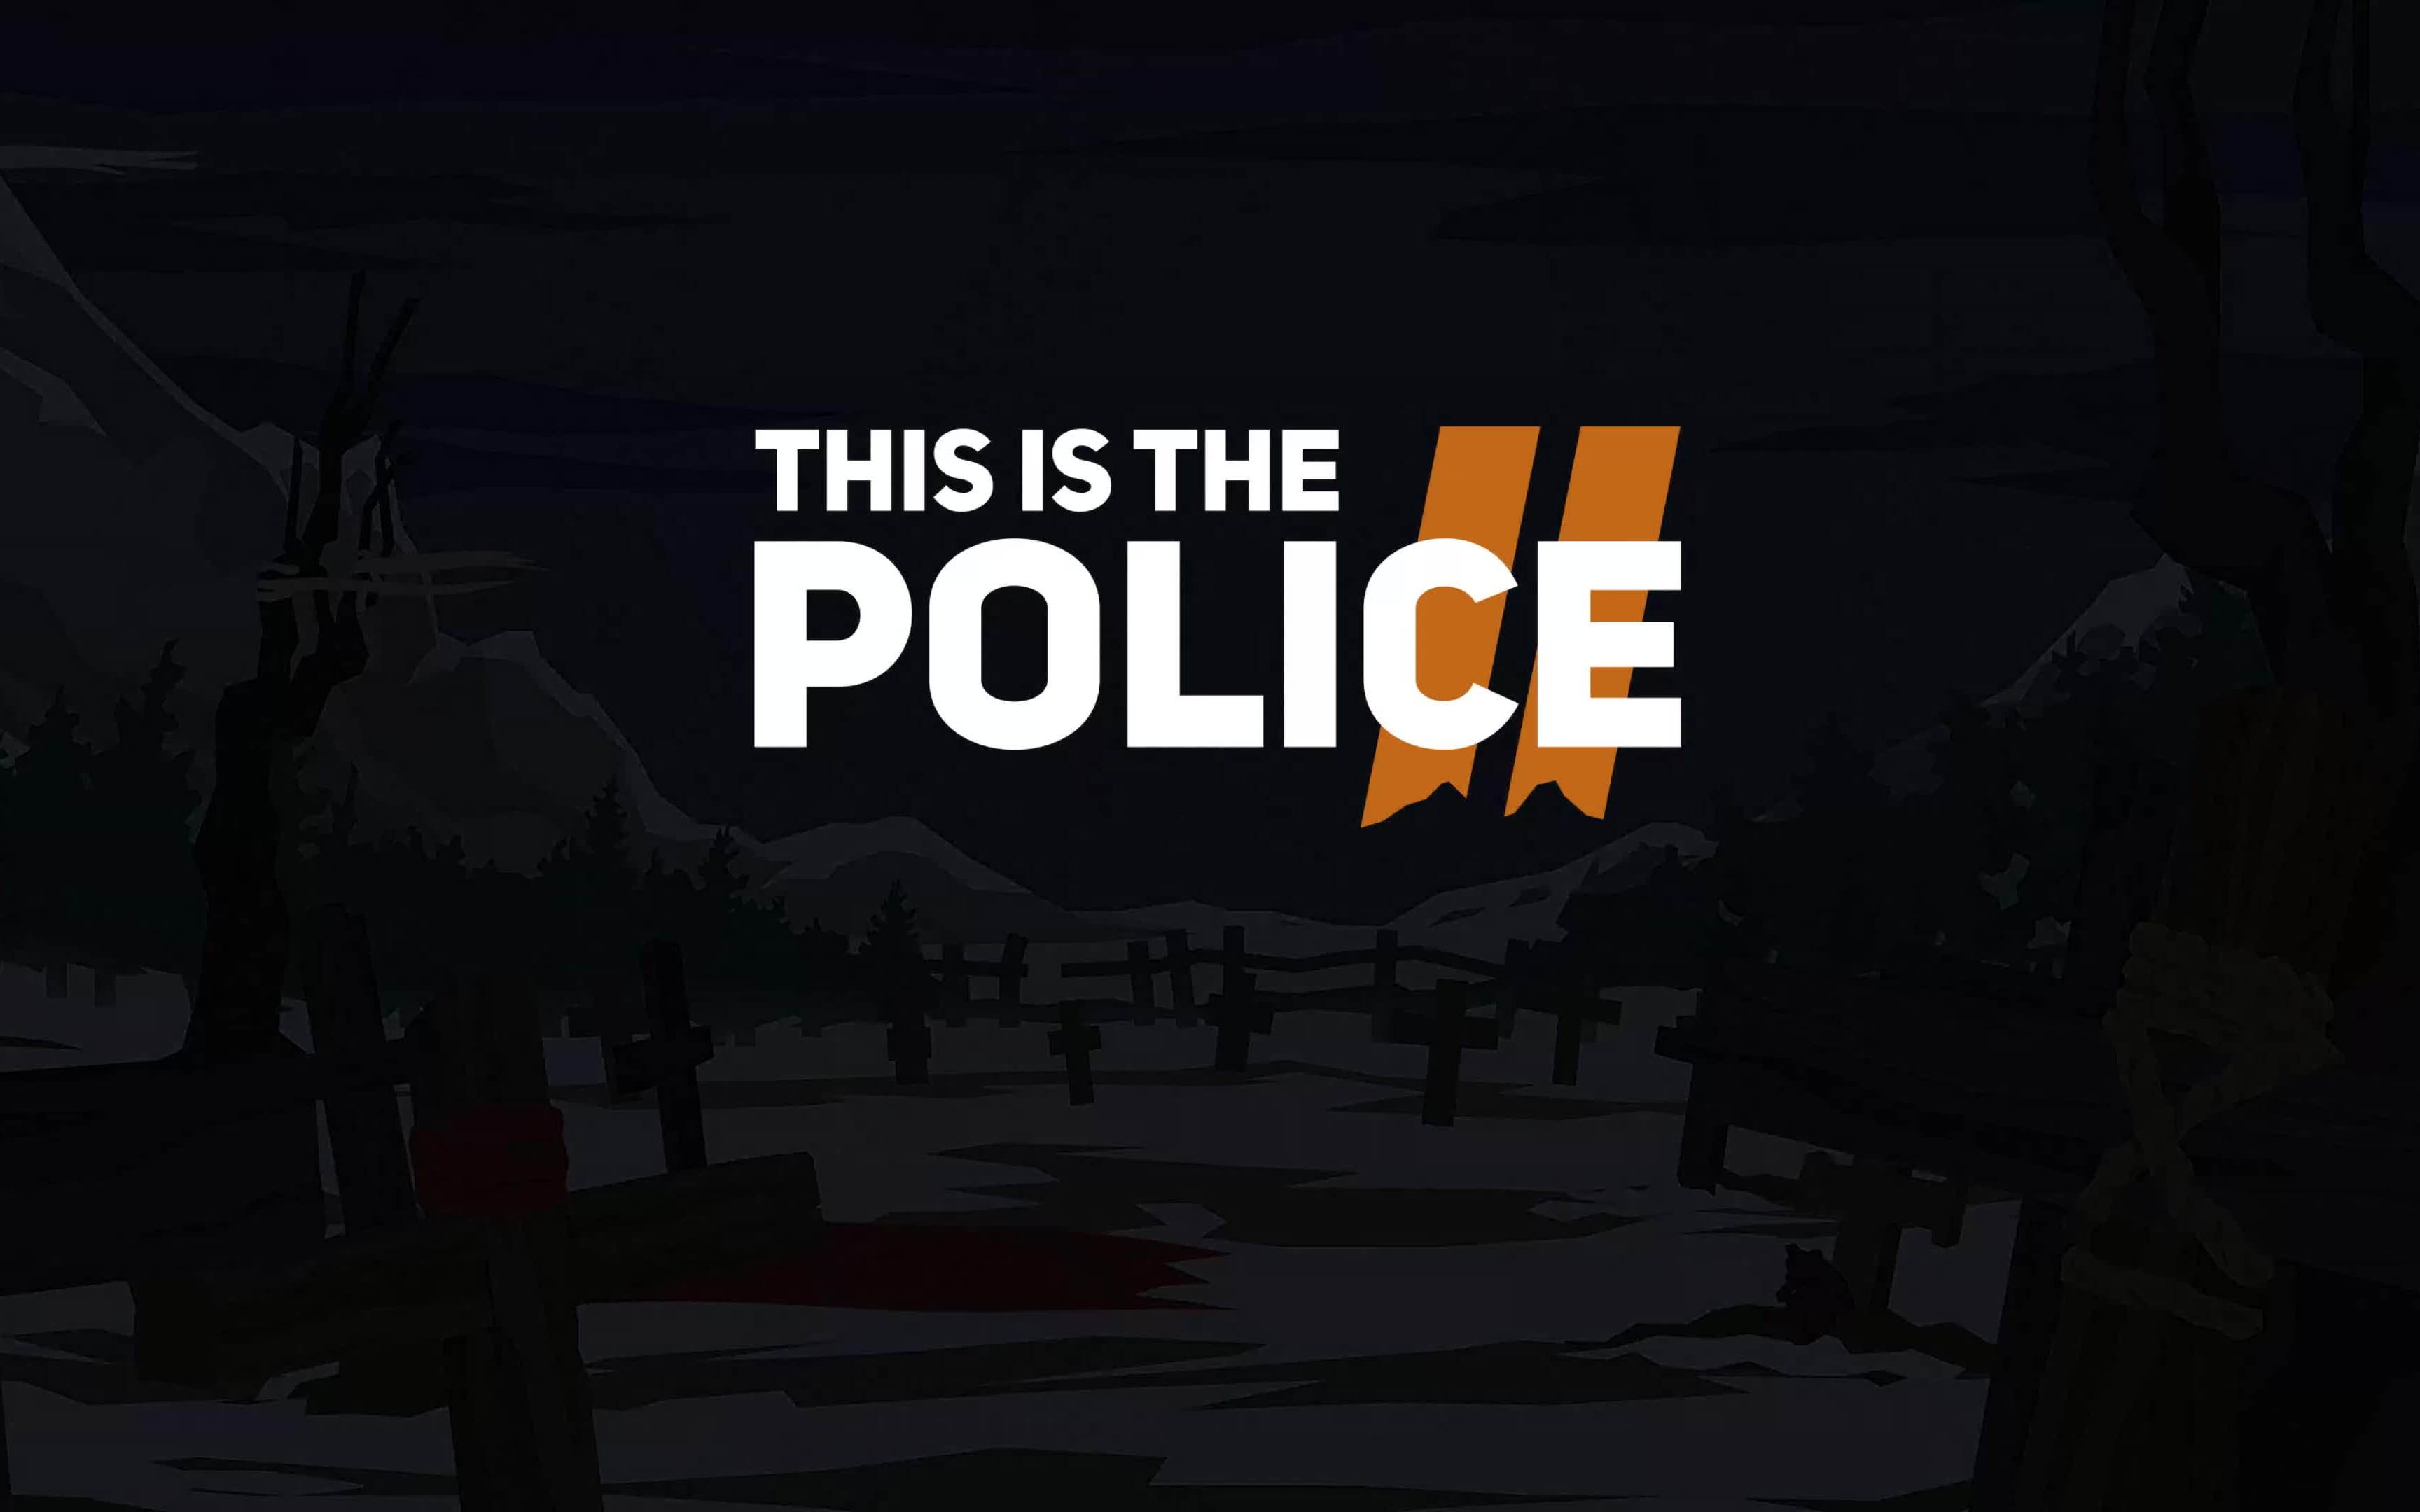 【steam新游推荐】《这是 警察2》(this is the police 2)